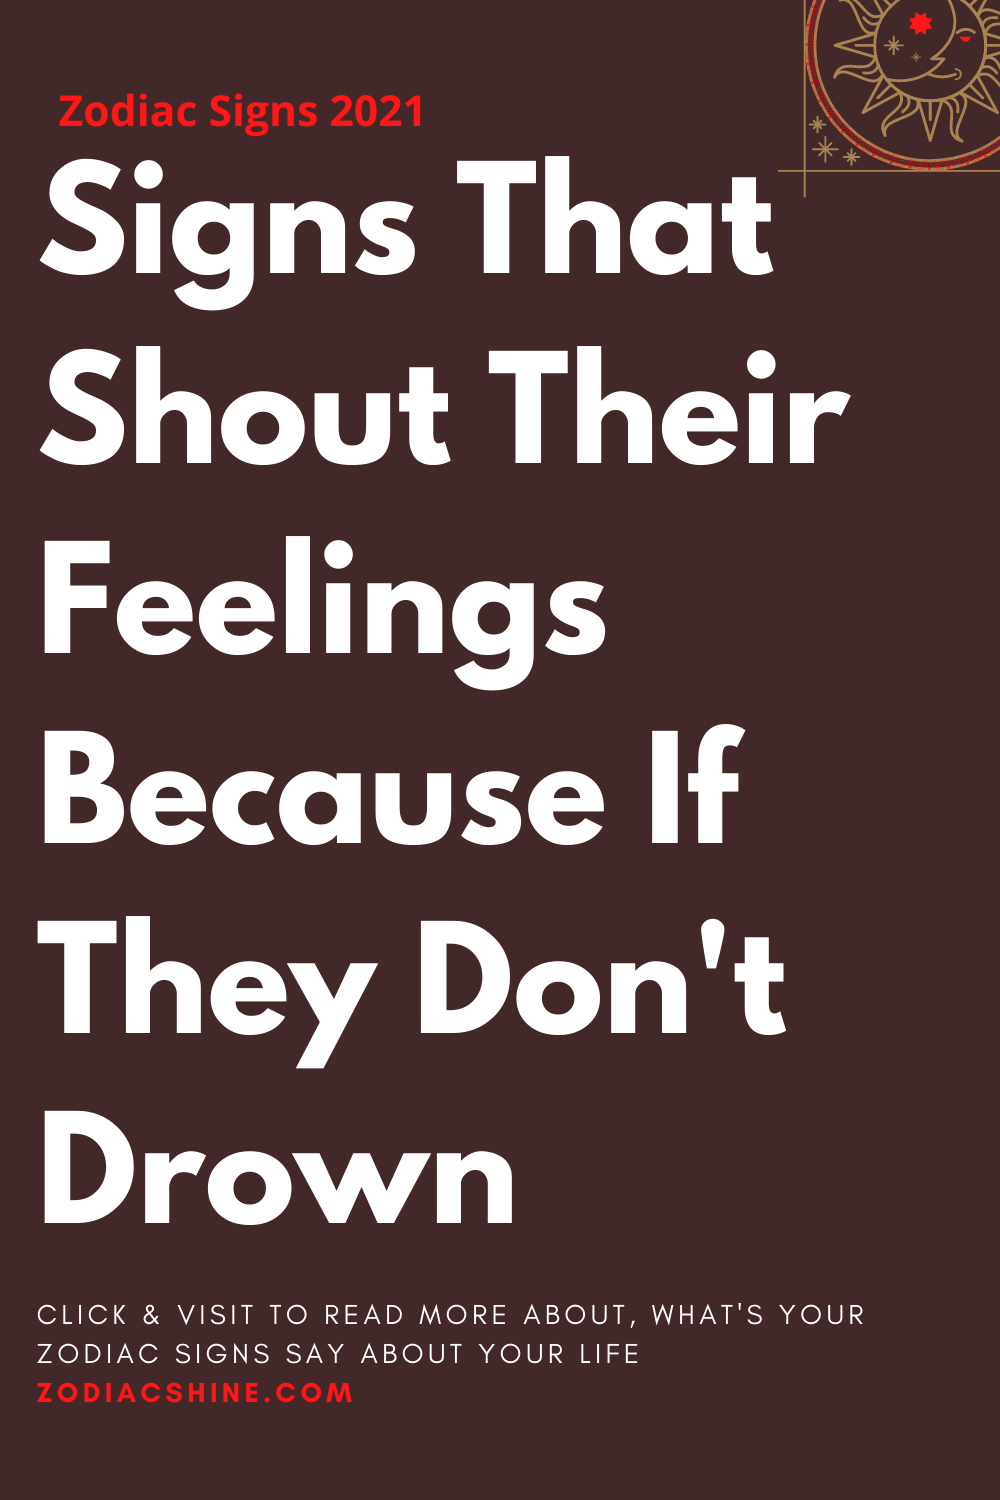 Signs That Shout Their Feelings Because If They Don't Drown